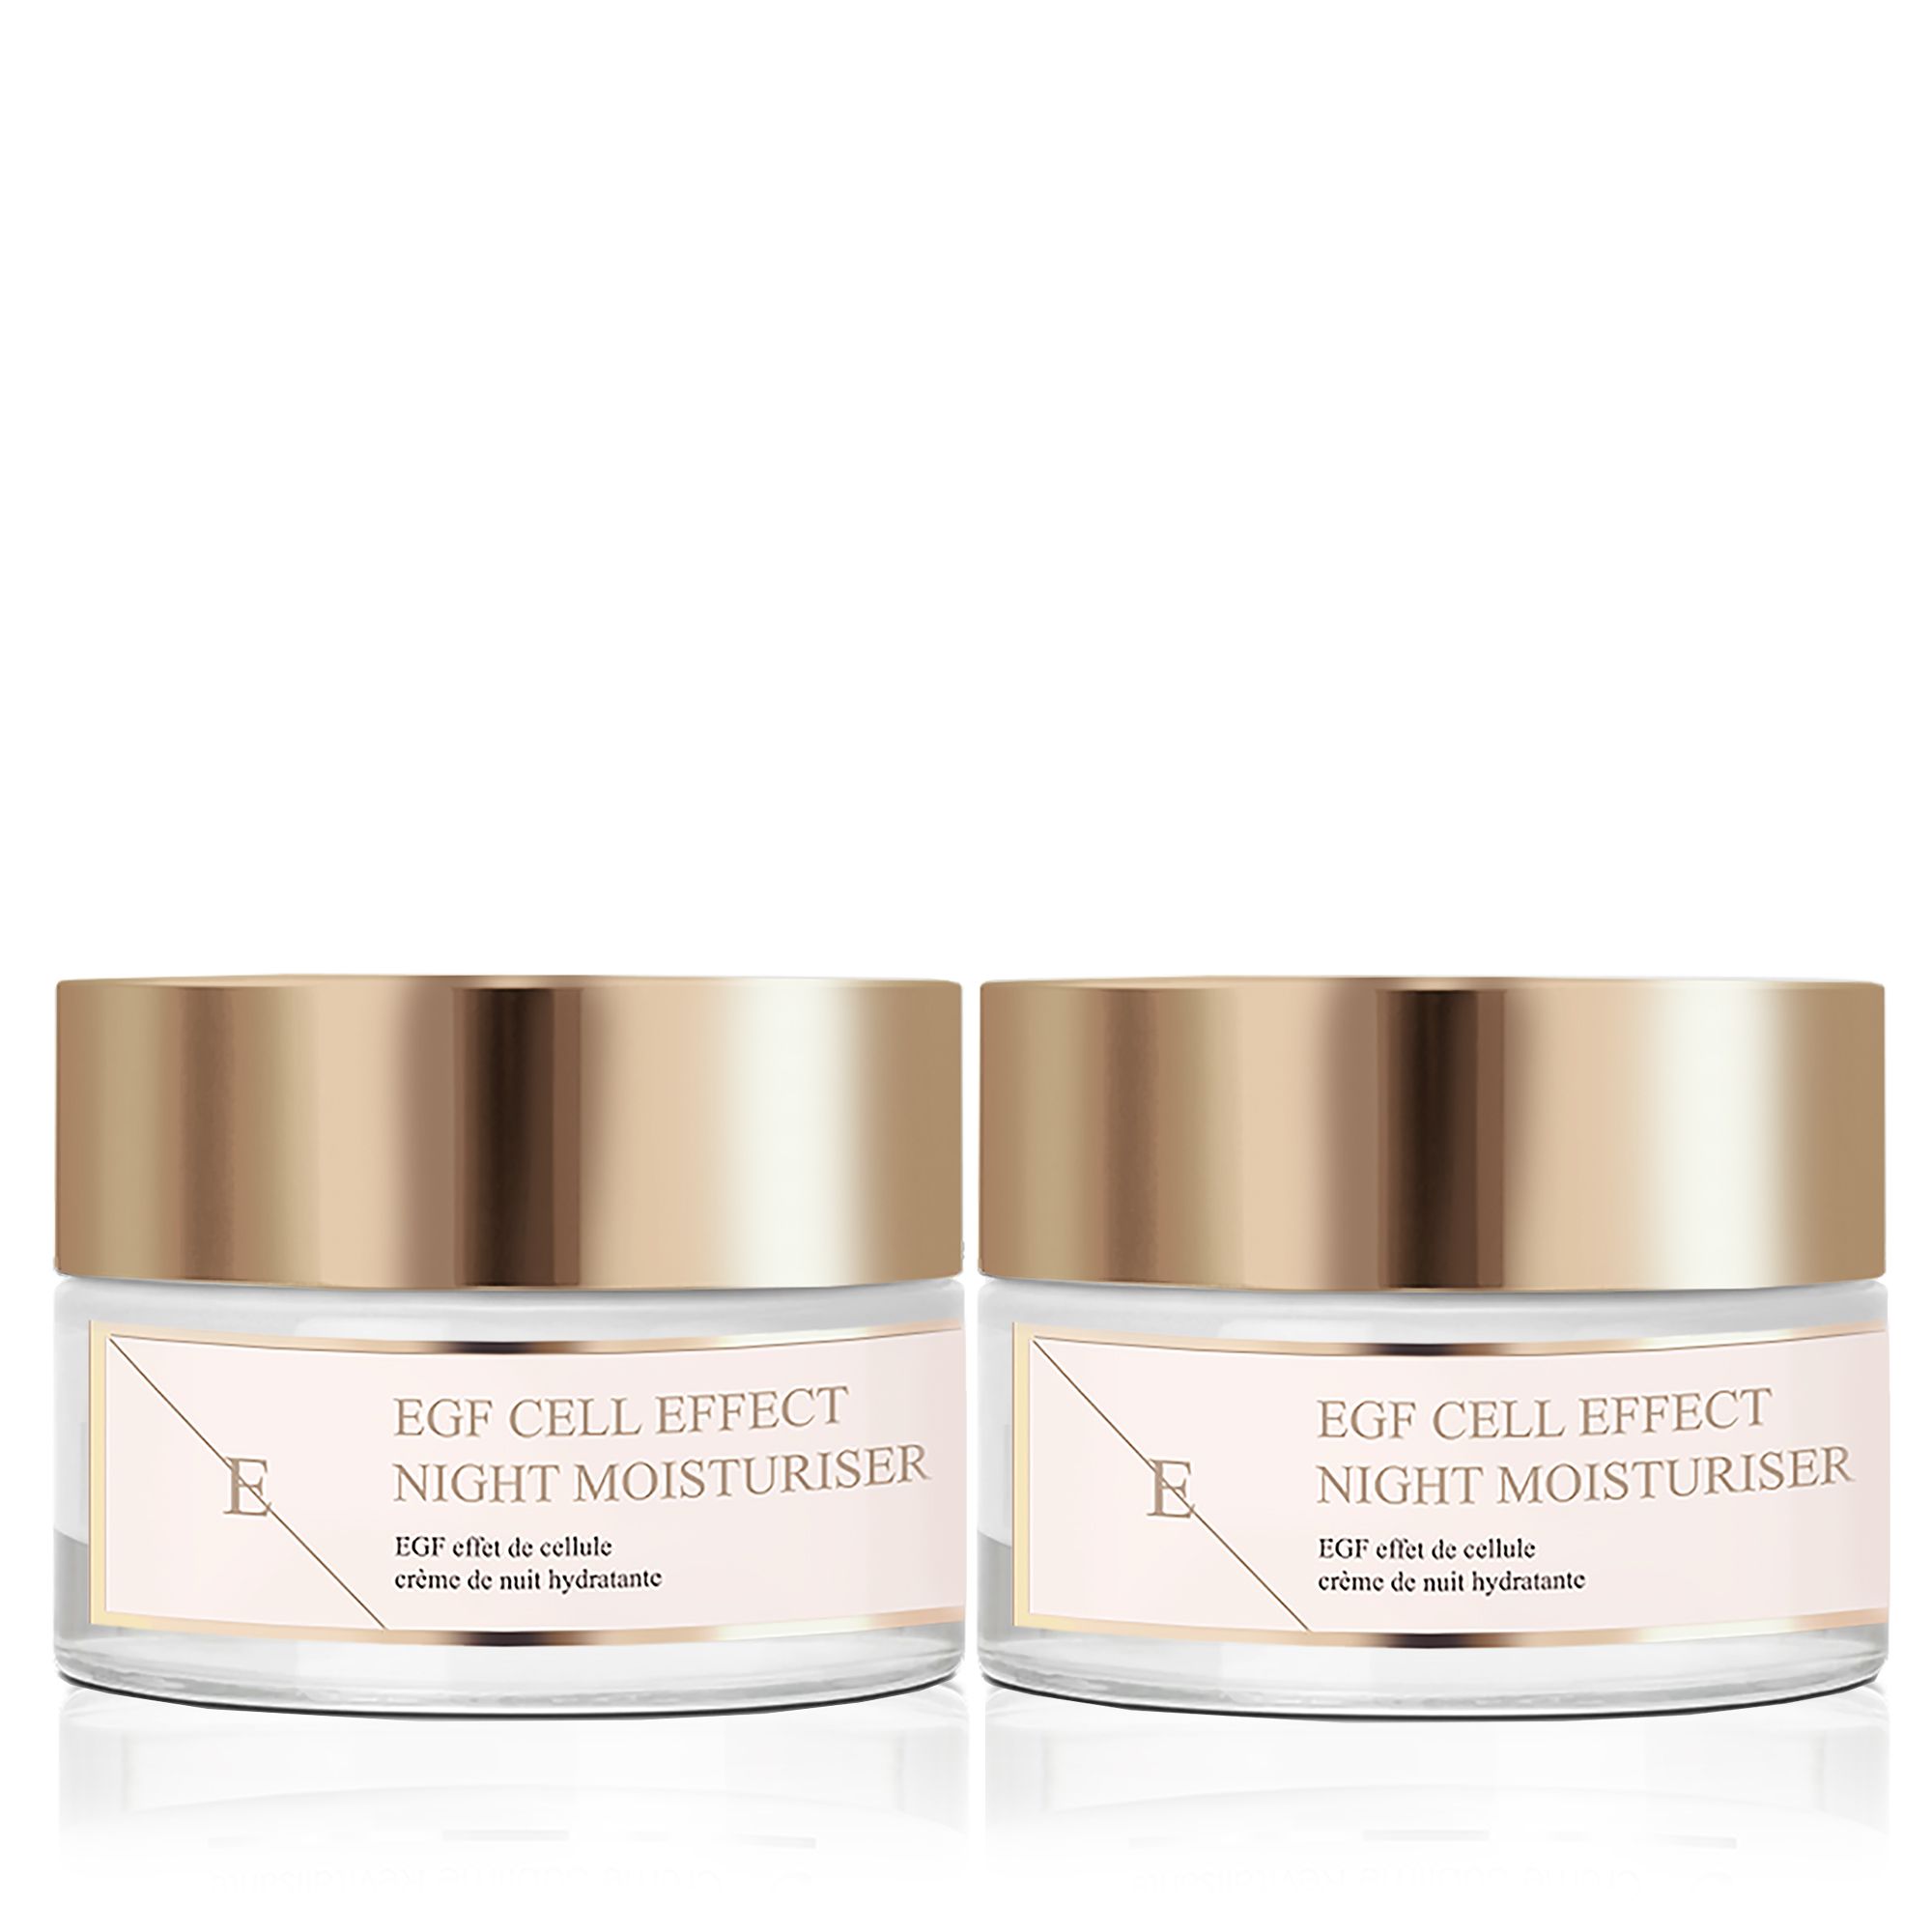 2 x EGF CELL EFFECT NIGHT MOISTURISER

EGF Cell Effect night moisturiser aims to boost hydration and skin renewal for a smooth youthful looking skin. This night moisturiser contains a unique ingredient called SH-Oligopeptide-1 that has an identical chemical structure to an epidermal growth factor. Epidermal growth factor works to increase the rate of renewal of the skin smoothing the look of wrinkles and fine lines.

Key Ingredients:

SH-OLIGOPEPTIDE-1
SH-Oligopeptide-1 that has an identical chemical structure to an epidermal growth factor. Epidermal growth factor works to increase the rate of renewal of the skin smoothing the look of wrinkles and fine lines.

SODIUM HYALURONATE
Hyaluronic Acid is naturally found in our skin, as we age our body's natural production of hyaluronic acid slows down. Hyaluronic acid is a key element making the skin looking plump and youthful as it holds moisture 1000 times its own weight. Our hyaluronic acid is called Sodium Hyaluronate and it is a smaller size of hyaluronic acid that is able to penetrate and hydrate more deeper levels of the skin than normal hyaluronic acid.

JAPANESE TEA OIL
Japanese tea oil is high in antioxidants that protect the skin from free radical stress that can damage the skin.

SHEA BUTTER
Shea butter is known for its moisturising and skin softening benefits. It is also high in vitamin E, A and F that protect the skin from free radical stress.

ARGAN OIL
Argan oil is lightweight quickly absorbing oil with great fatty acids ratio that moisturises the skin and boosts skin softness.

USAGE: Apply a pea-sized amount of the cream on cleansed face, neckline and neck in the evening.Â 

Ingredients: Aqua (Water), Glycerin, Butyrospermum Parkii (Shea) Butter, Urea, Squalane, Argania Spinosa Kernel Oil, Propylene Glycol, Cetearyl Alcohol, Glyceryl Stearate, Isoamyl Cocoate, Caprylic/Capric Triglyceride, Glyceryl Stearate Citrate, Cera Alba, Camellia Japonica Seed Oil, Dimethicone, Phenoxyethanol, Cyclopentasiloxane, Cyclohexasiloxane, SH-Oligopeptide-1, Sodium Hyaluronate, Hydrogenated Lecithin, Sodium Oleate, Glycine Soja (Soyabean) Oil, Acrylates/C10-30 Alkyl Acrylate Crosspolymer, Triethanolamine, Ethylhexylglycerin, Parfum (Fragrance), Disodium EDTA, BHA, Benzyl Salicylate, Butylphenyl Methylpropional, Linalool.